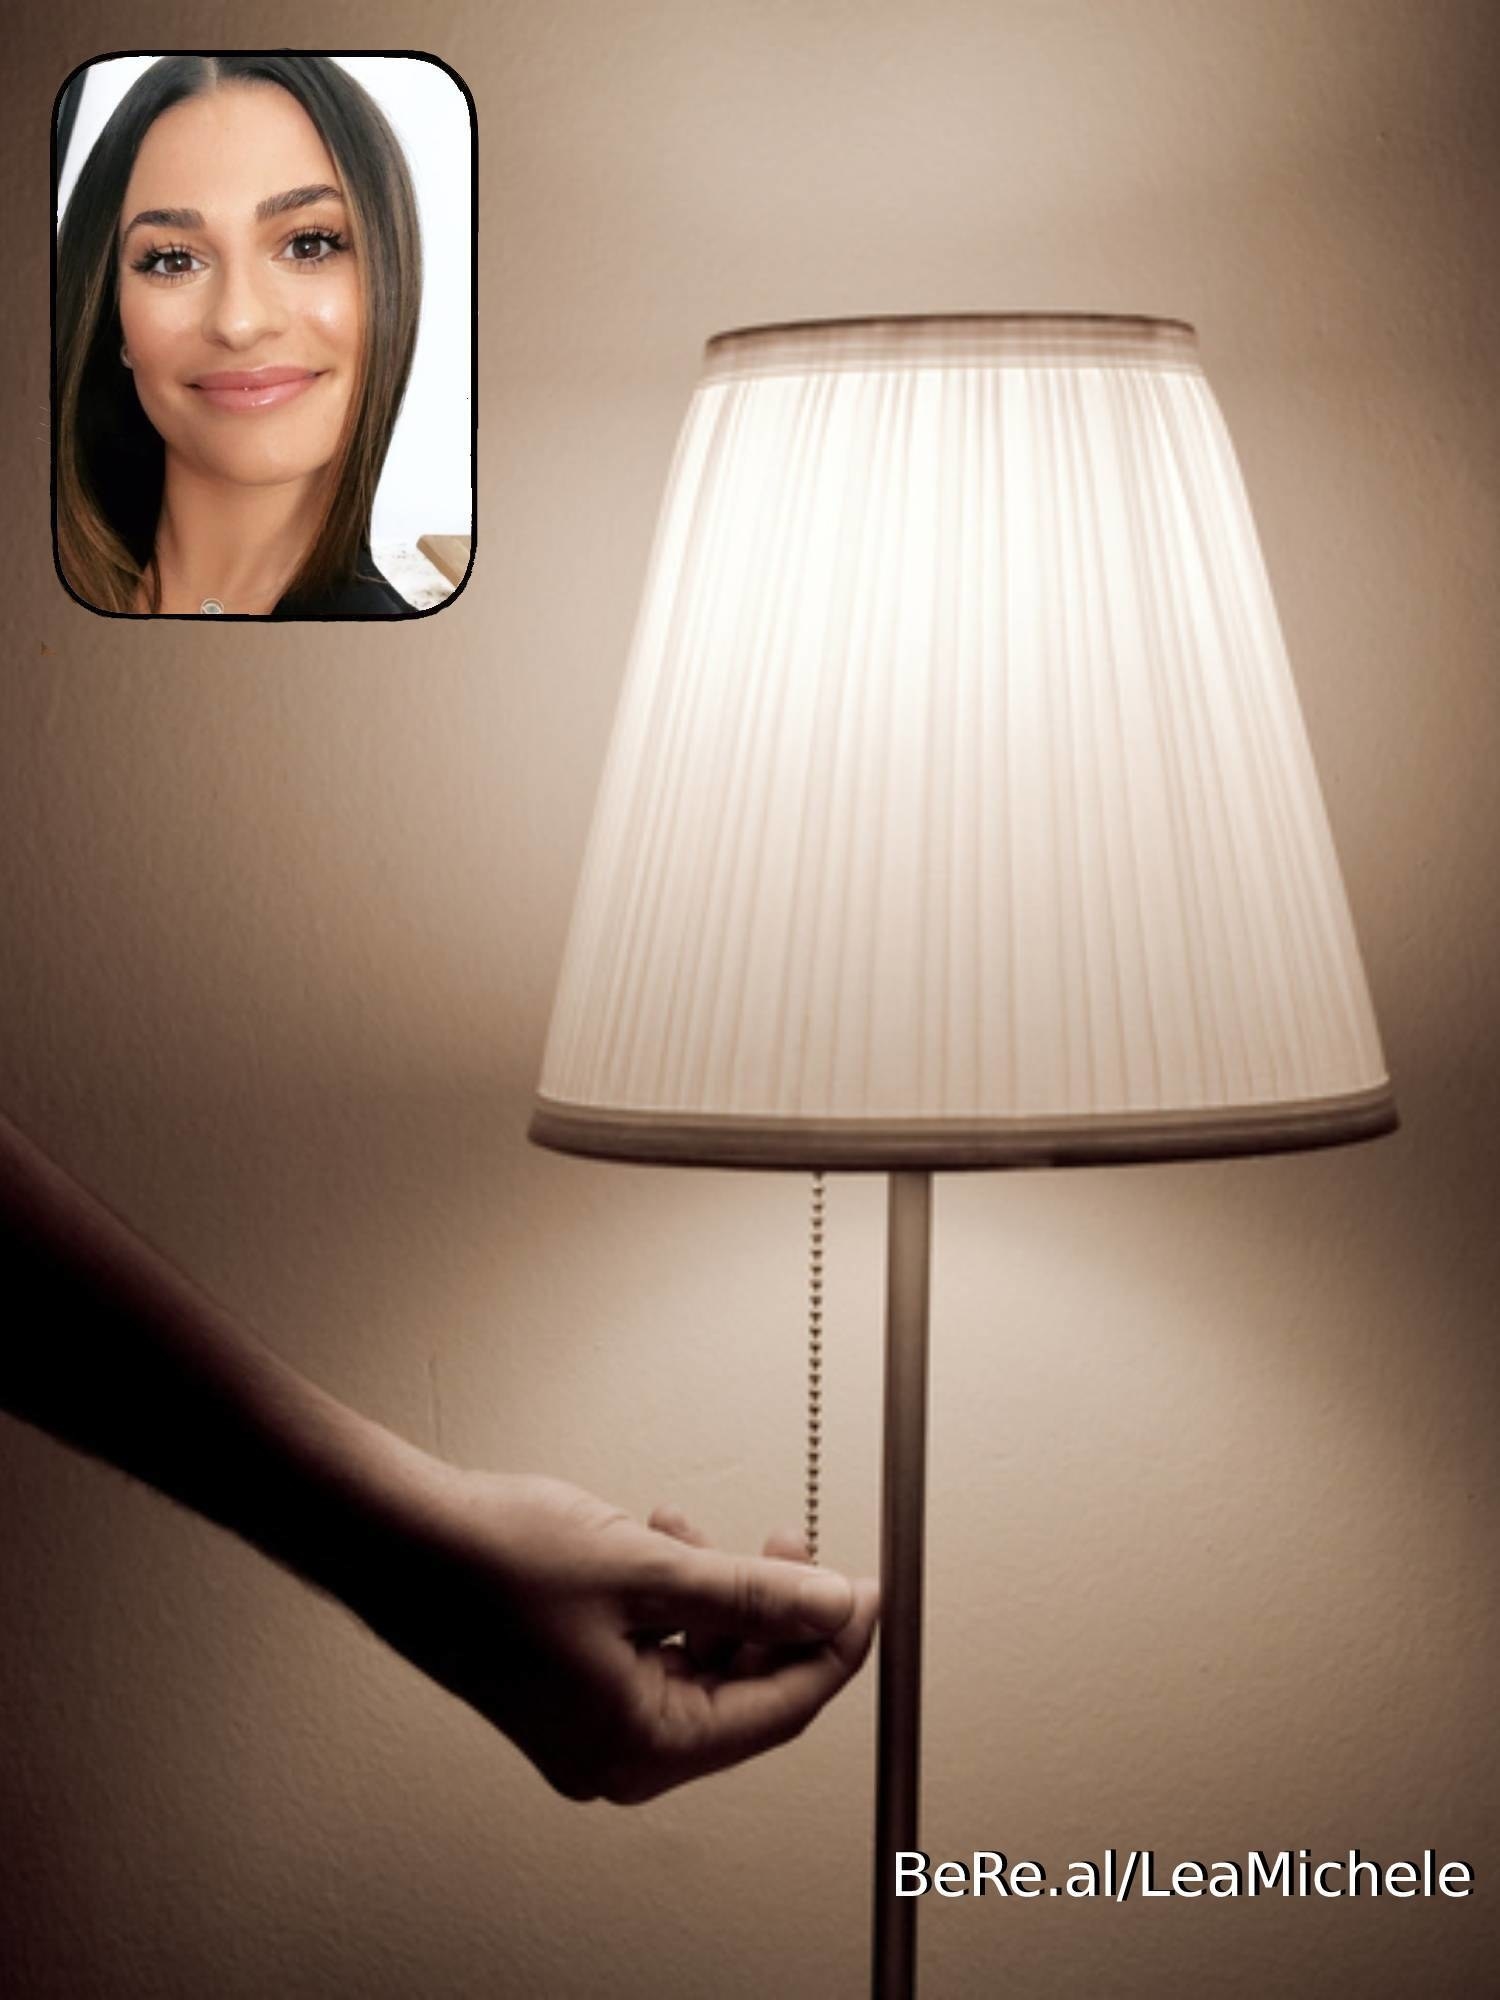 Lea Michele smiling as someone turns on a lamp